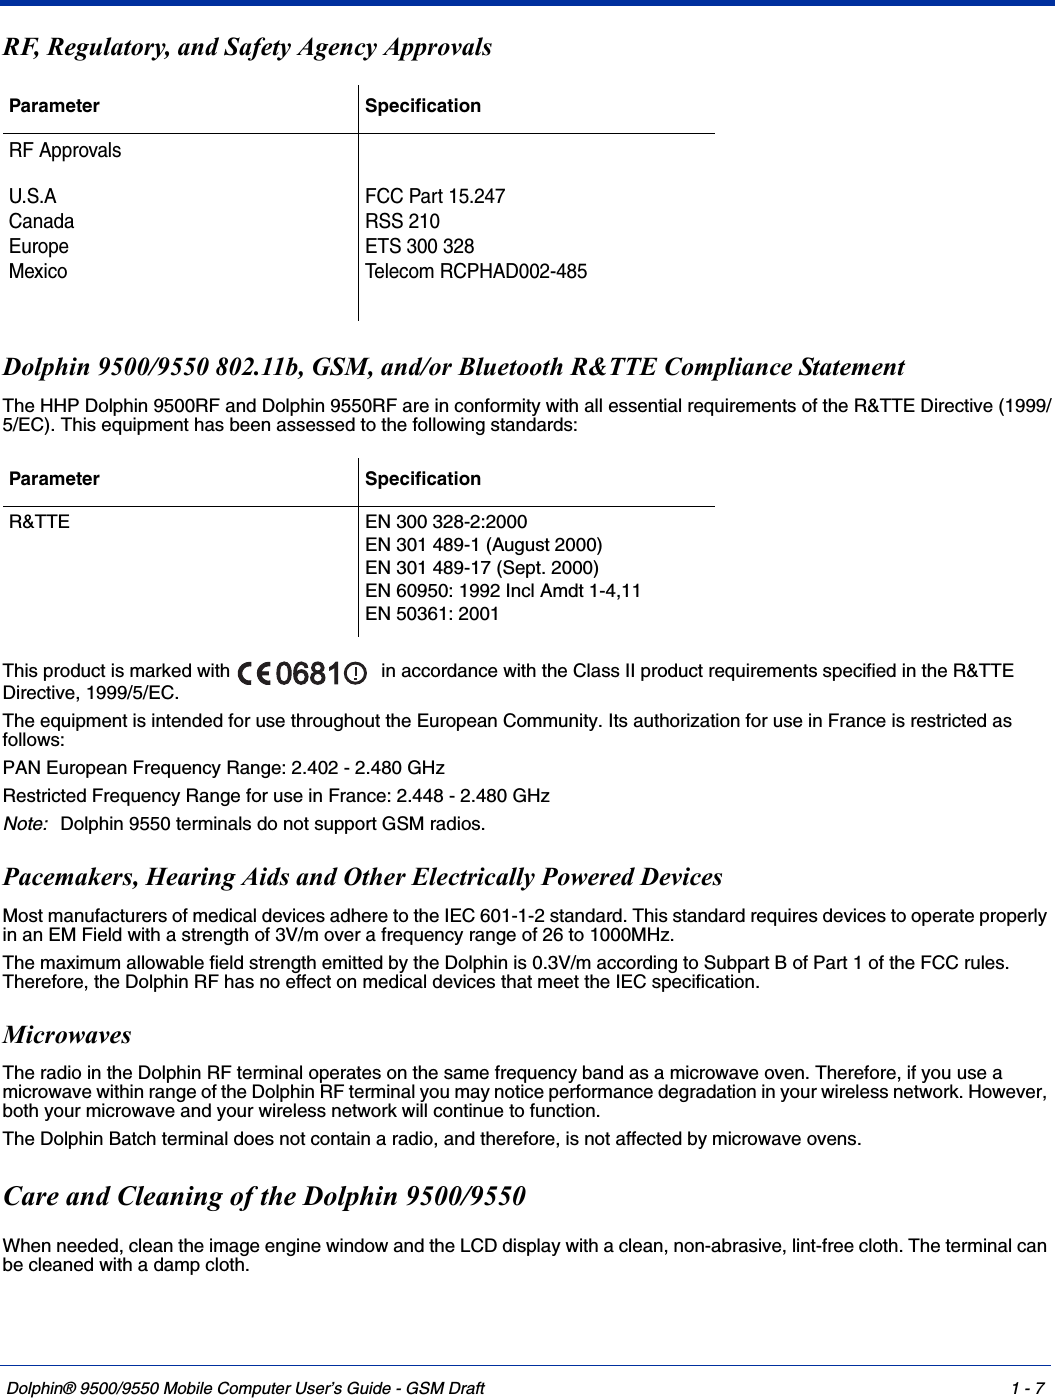 Dolphin® 9500/9550 Mobile Computer User’s Guide - GSM Draft 1 - 7RF, Regulatory, and Safety Agency Approvals Dolphin 9500/9550 802.11b, GSM, and/or Bluetooth R&amp;TTE Compliance StatementThe HHP Dolphin 9500RF and Dolphin 9550RF are in conformity with all essential requirements of the R&amp;TTE Directive (1999/5/EC). This equipment has been assessed to the following standards:This product is marked with    in accordance with the Class II product requirements specified in the R&amp;TTE Directive, 1999/5/EC.The equipment is intended for use throughout the European Community. Its authorization for use in France is restricted as follows:PAN European Frequency Range: 2.402 - 2.480 GHzRestricted Frequency Range for use in France: 2.448 - 2.480 GHzNote: Dolphin 9550 terminals do not support GSM radios.Pacemakers, Hearing Aids and Other Electrically Powered DevicesMost manufacturers of medical devices adhere to the IEC 601-1-2 standard. This standard requires devices to operate properly in an EM Field with a strength of 3V/m over a frequency range of 26 to 1000MHz. The maximum allowable field strength emitted by the Dolphin is 0.3V/m according to Subpart B of Part 1 of the FCC rules. Therefore, the Dolphin RF has no effect on medical devices that meet the IEC specification. MicrowavesThe radio in the Dolphin RF terminal operates on the same frequency band as a microwave oven. Therefore, if you use a microwave within range of the Dolphin RF terminal you may notice performance degradation in your wireless network. However, both your microwave and your wireless network will continue to function.The Dolphin Batch terminal does not contain a radio, and therefore, is not affected by microwave ovens.Care and Cleaning of the Dolphin 9500/9550When needed, clean the image engine window and the LCD display with a clean, non-abrasive, lint-free cloth. The terminal can be cleaned with a damp cloth.Parameter SpecificationRF ApprovalsU.S.ACanadaEuropeMexicoFCC Part 15.247RSS 210 ETS 300 328 Telecom RCPHAD002-485Parameter SpecificationR&amp;TTE EN 300 328-2:2000EN 301 489-1 (August 2000)EN 301 489-17 (Sept. 2000)EN 60950: 1992 Incl Amdt 1-4,11EN 50361: 2001